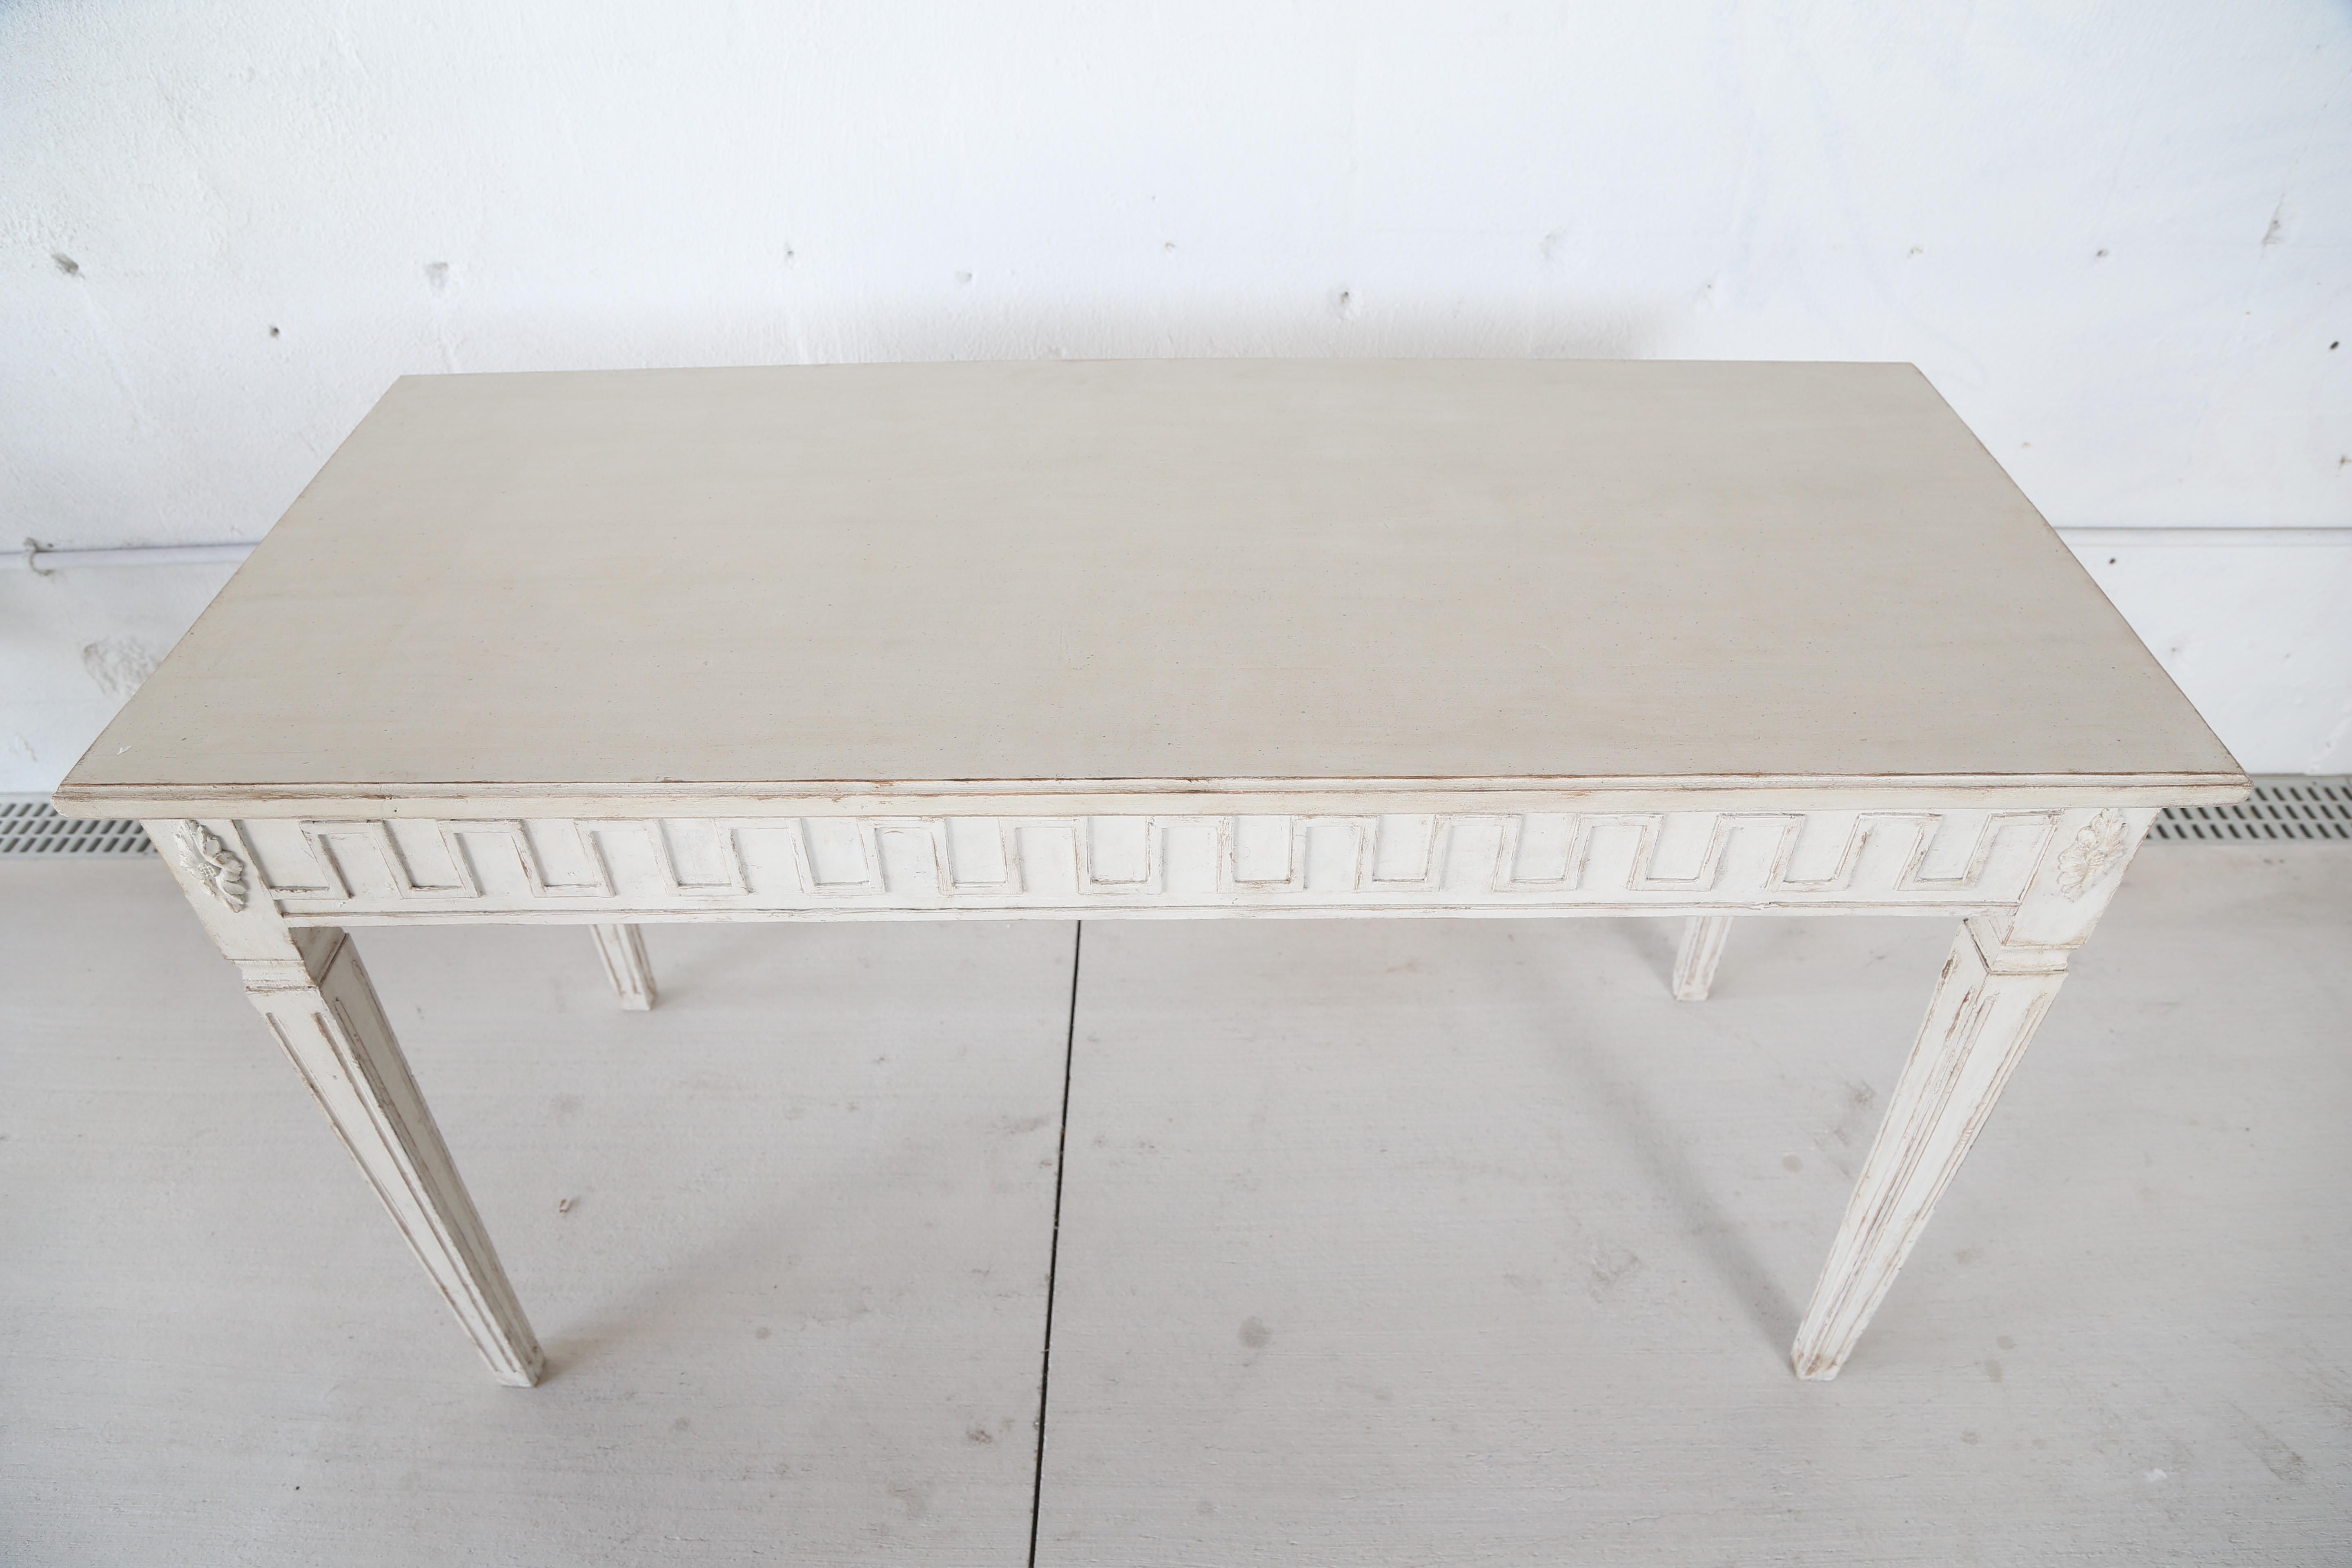 Antique Swedish Gustavian style painted console in Swedish white, apron adorned with Greek key carving and rosettes on the corners, square tapering fluted legs, simple white top, late 19th century.
 
Measures: H 30.75